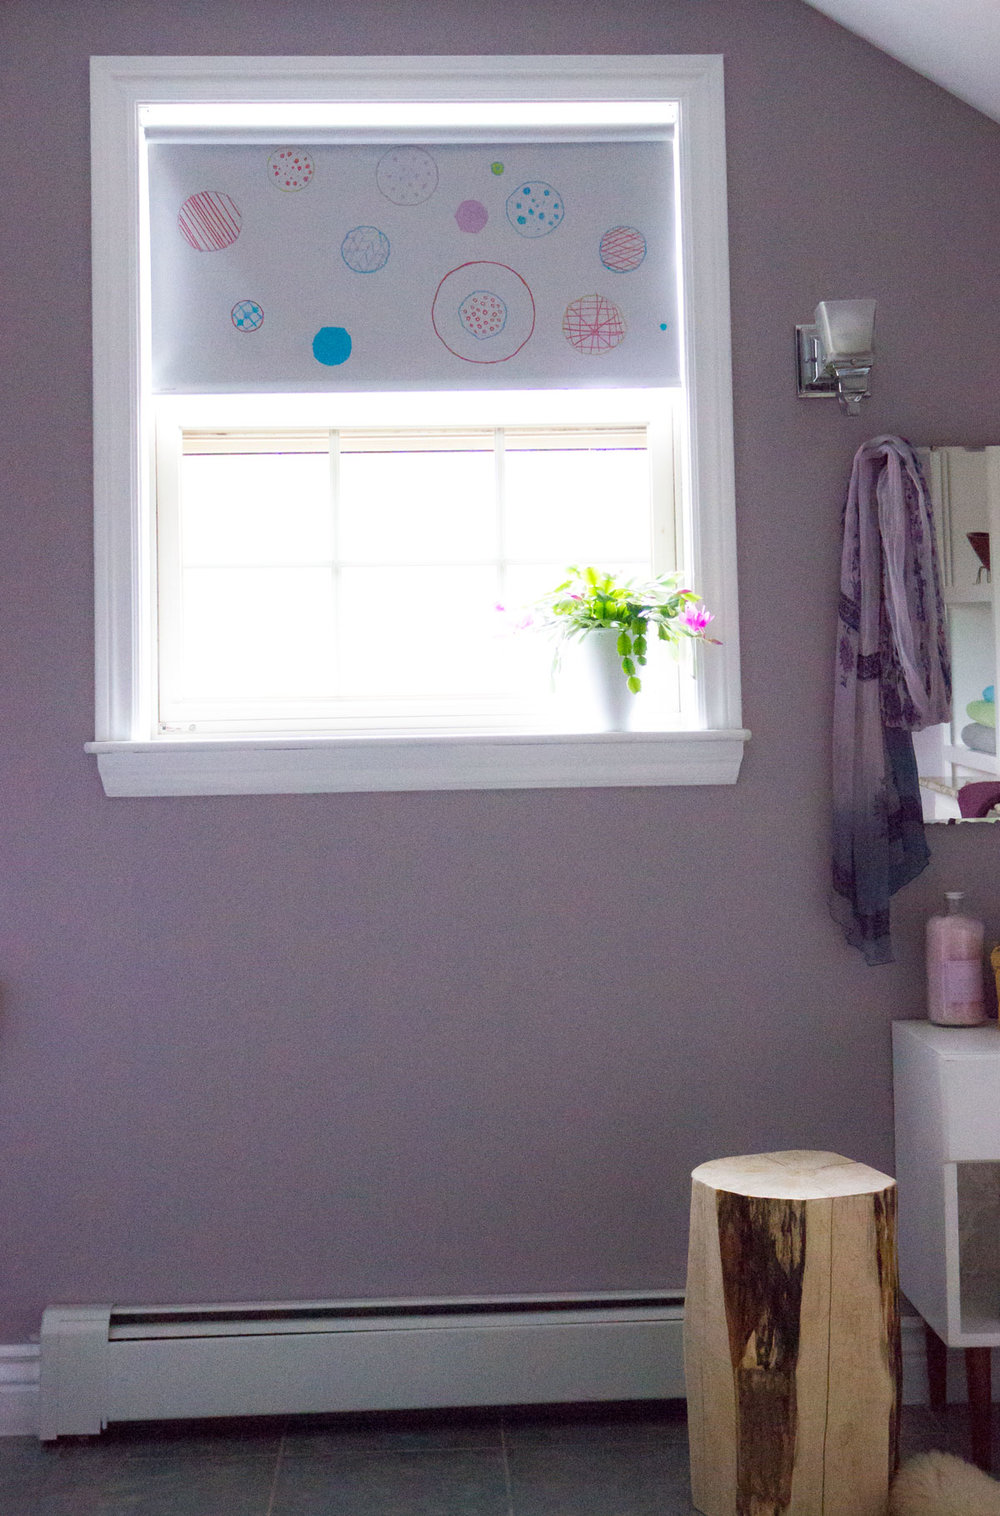 budget roller blind painted with polka dots for girls room